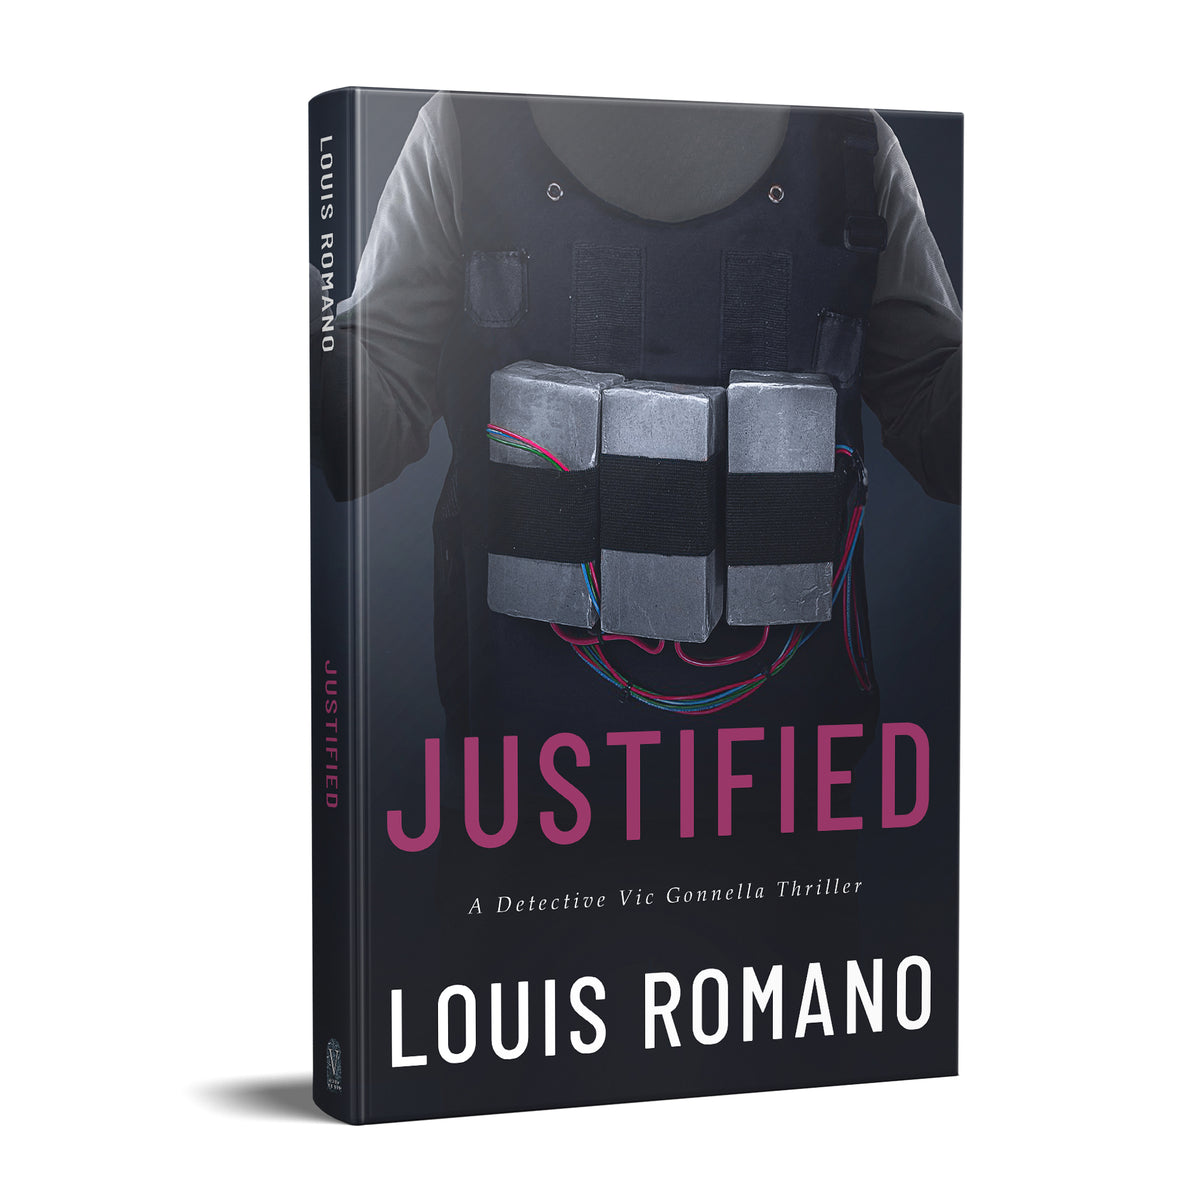 JUSTIFIED: A Detective Vic Gonnella Thriller